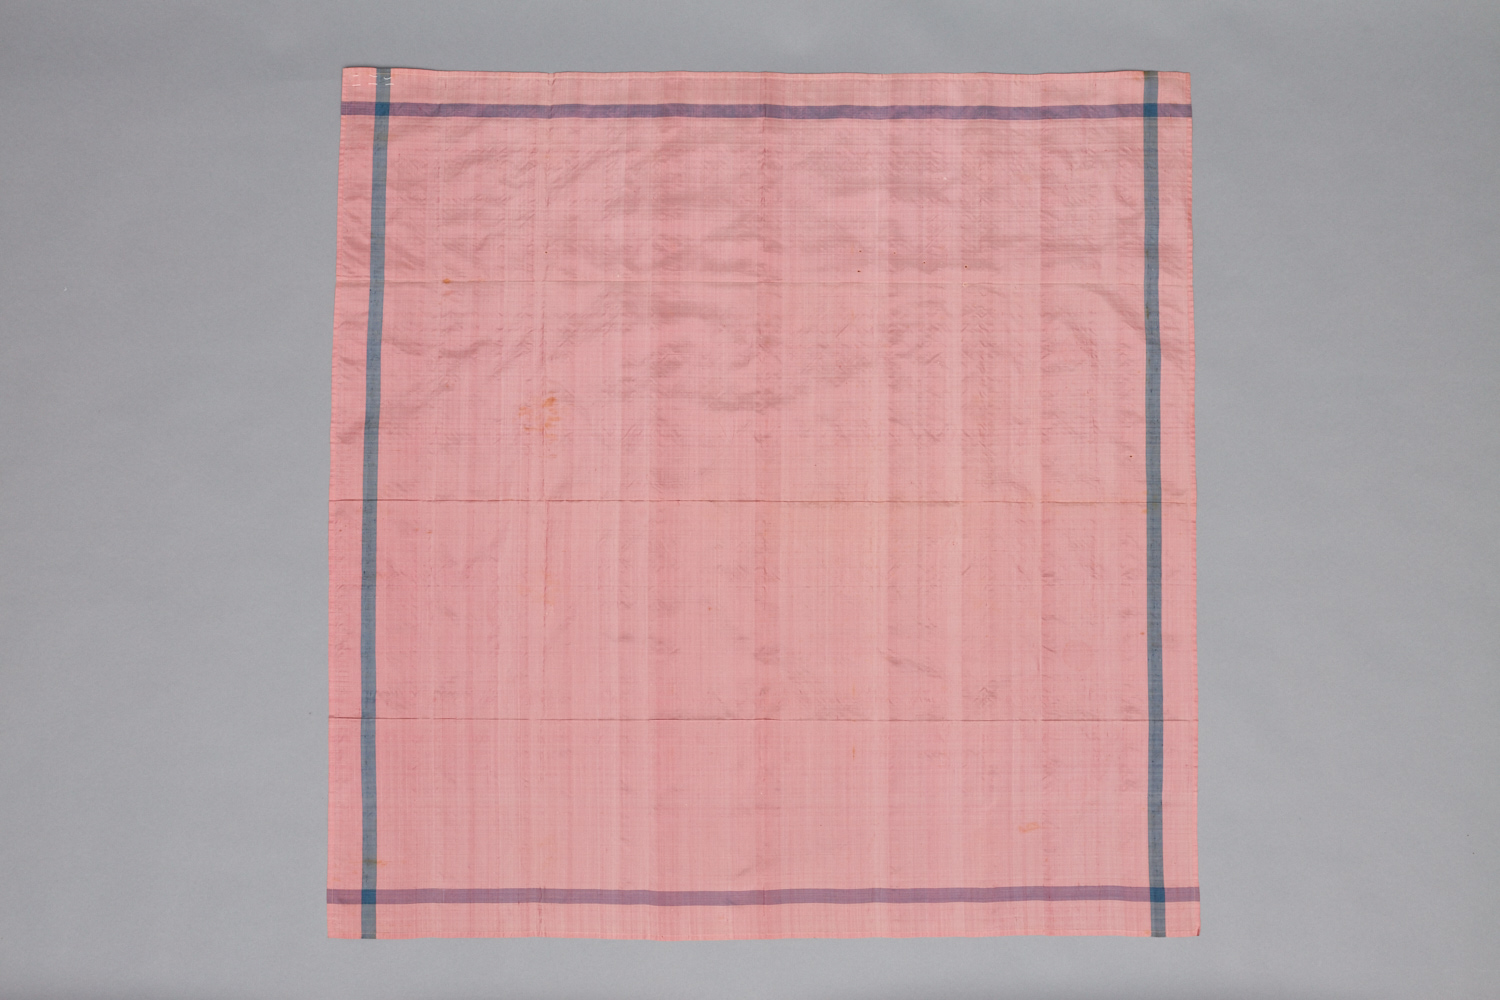 A pink and blue cloth hanging on a gray background.